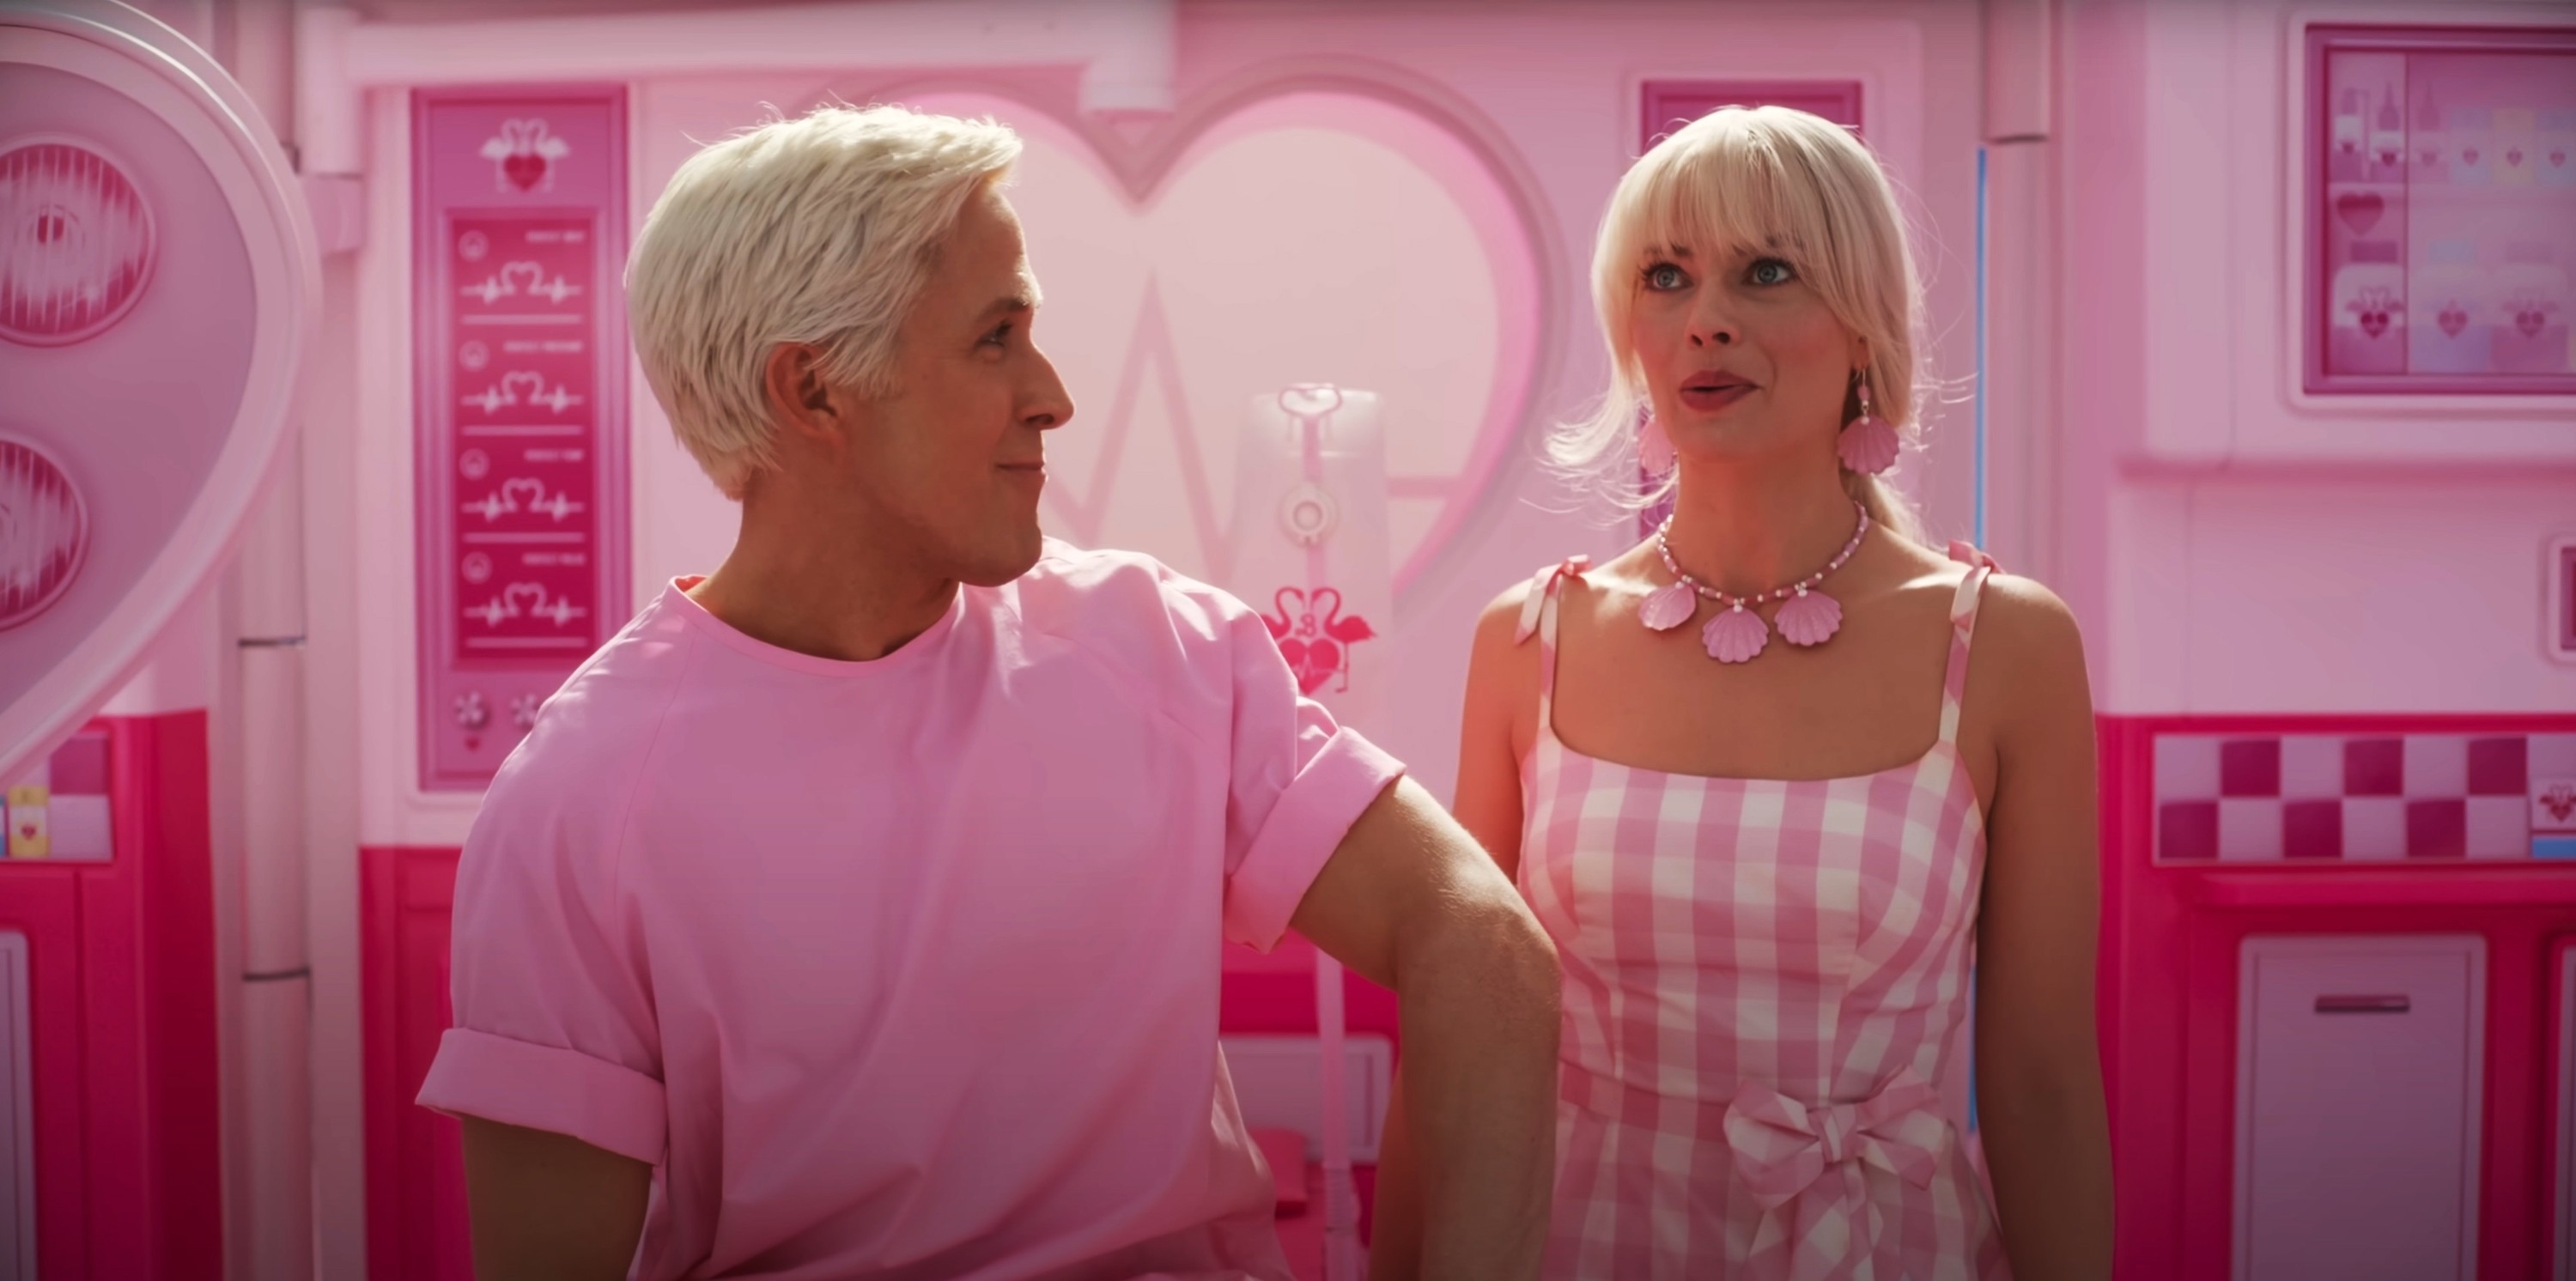 Two actors in a pink-themed scene, male in a plain t-shirt, female in a checkered dress with statement necklace